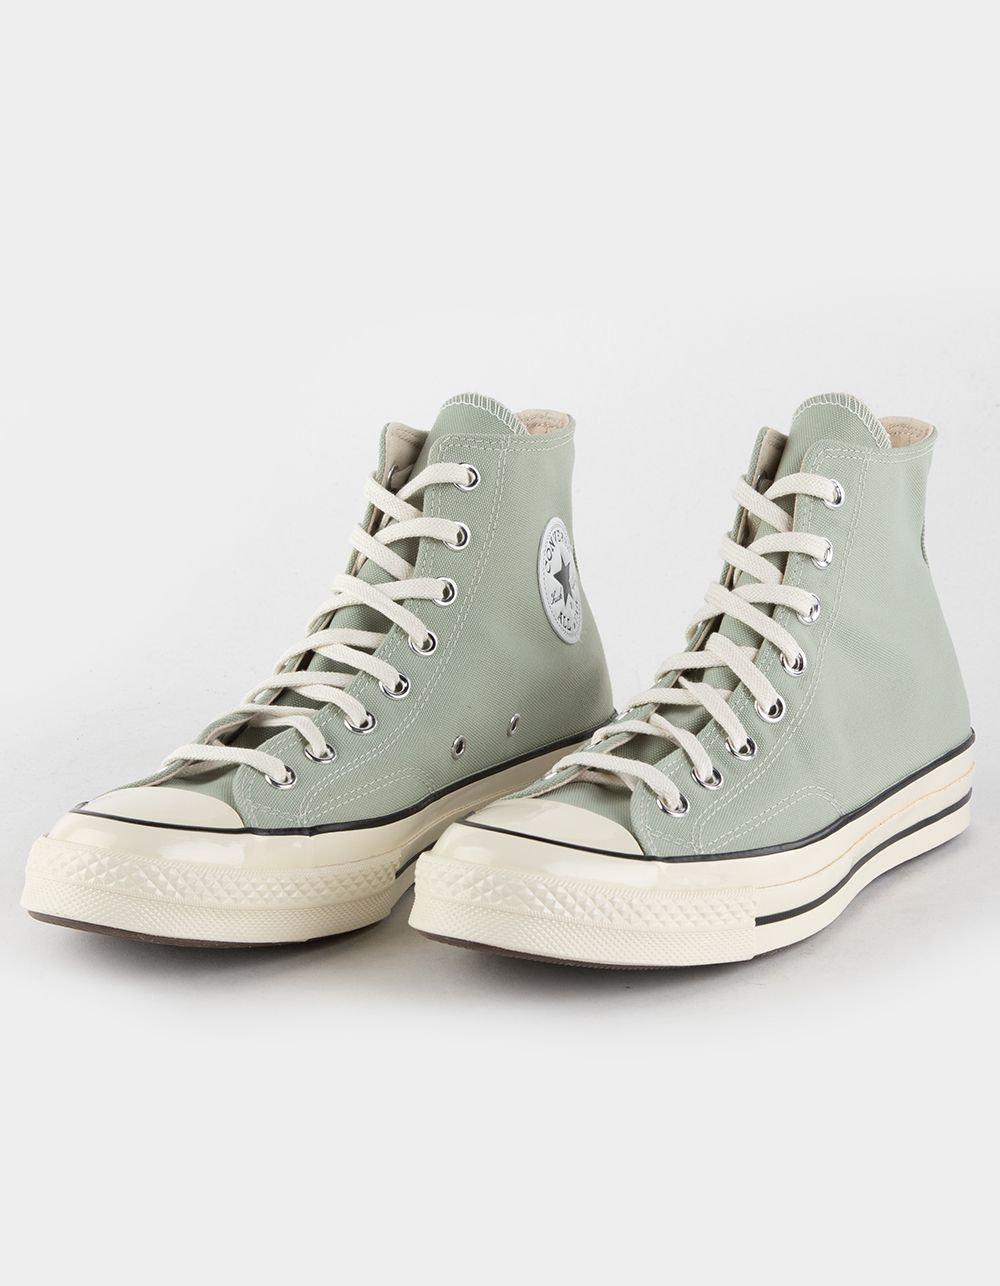 High Tops Shoes For Added Comfort Style
And Functionality